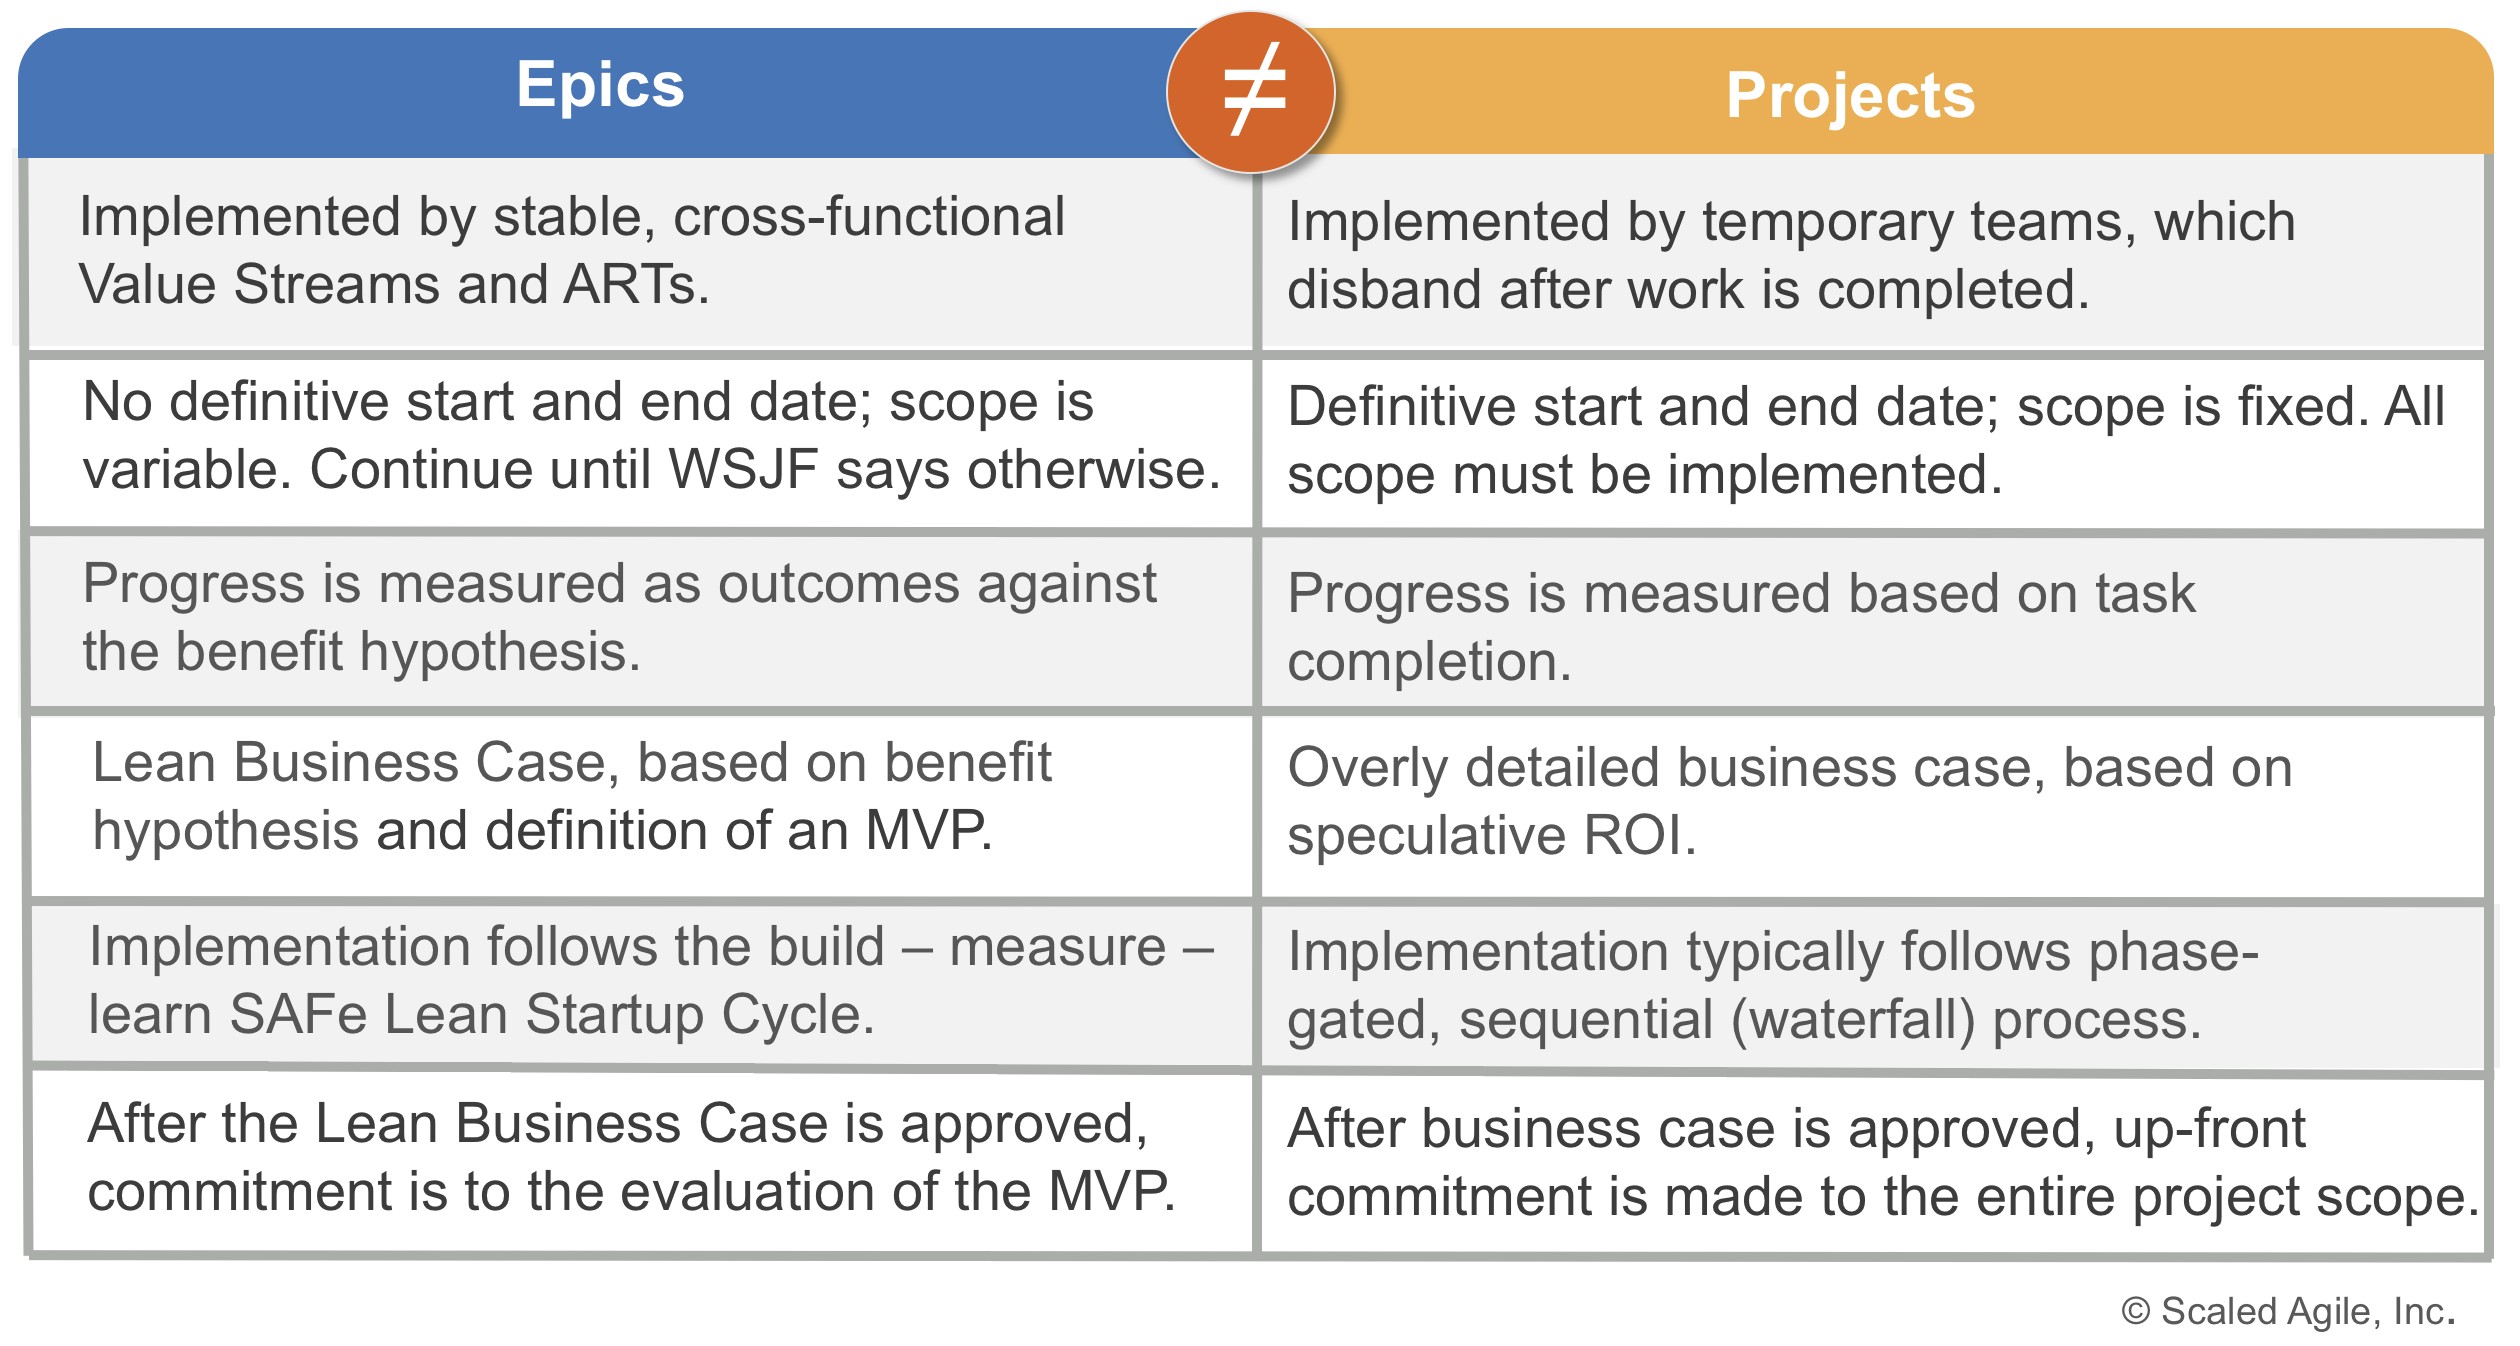 epic meaning in agile methodology